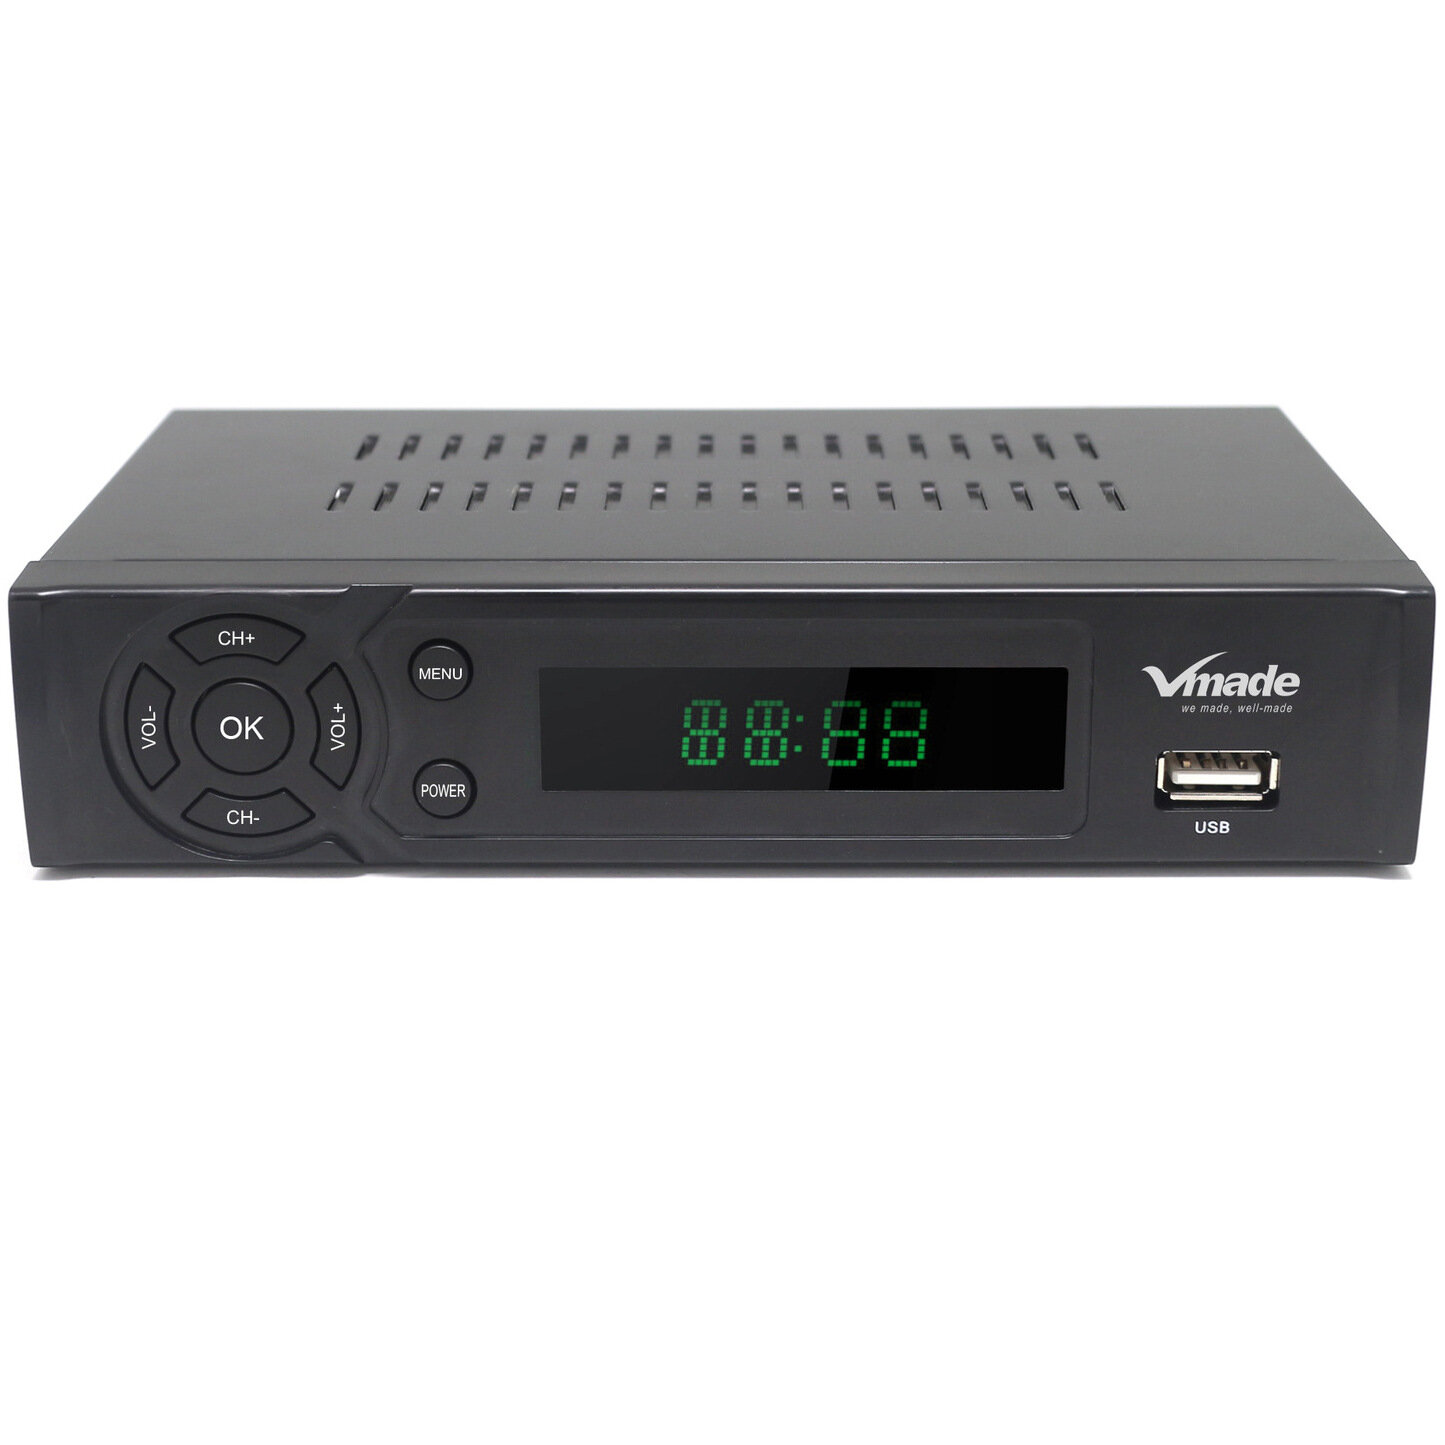 

VMADE DVB-T2 T TV Set Top Box TV Signal Receiver Tuner Dolby Digital H.264 MPEG-4 HD Video Decoder for Malaysia Singapor